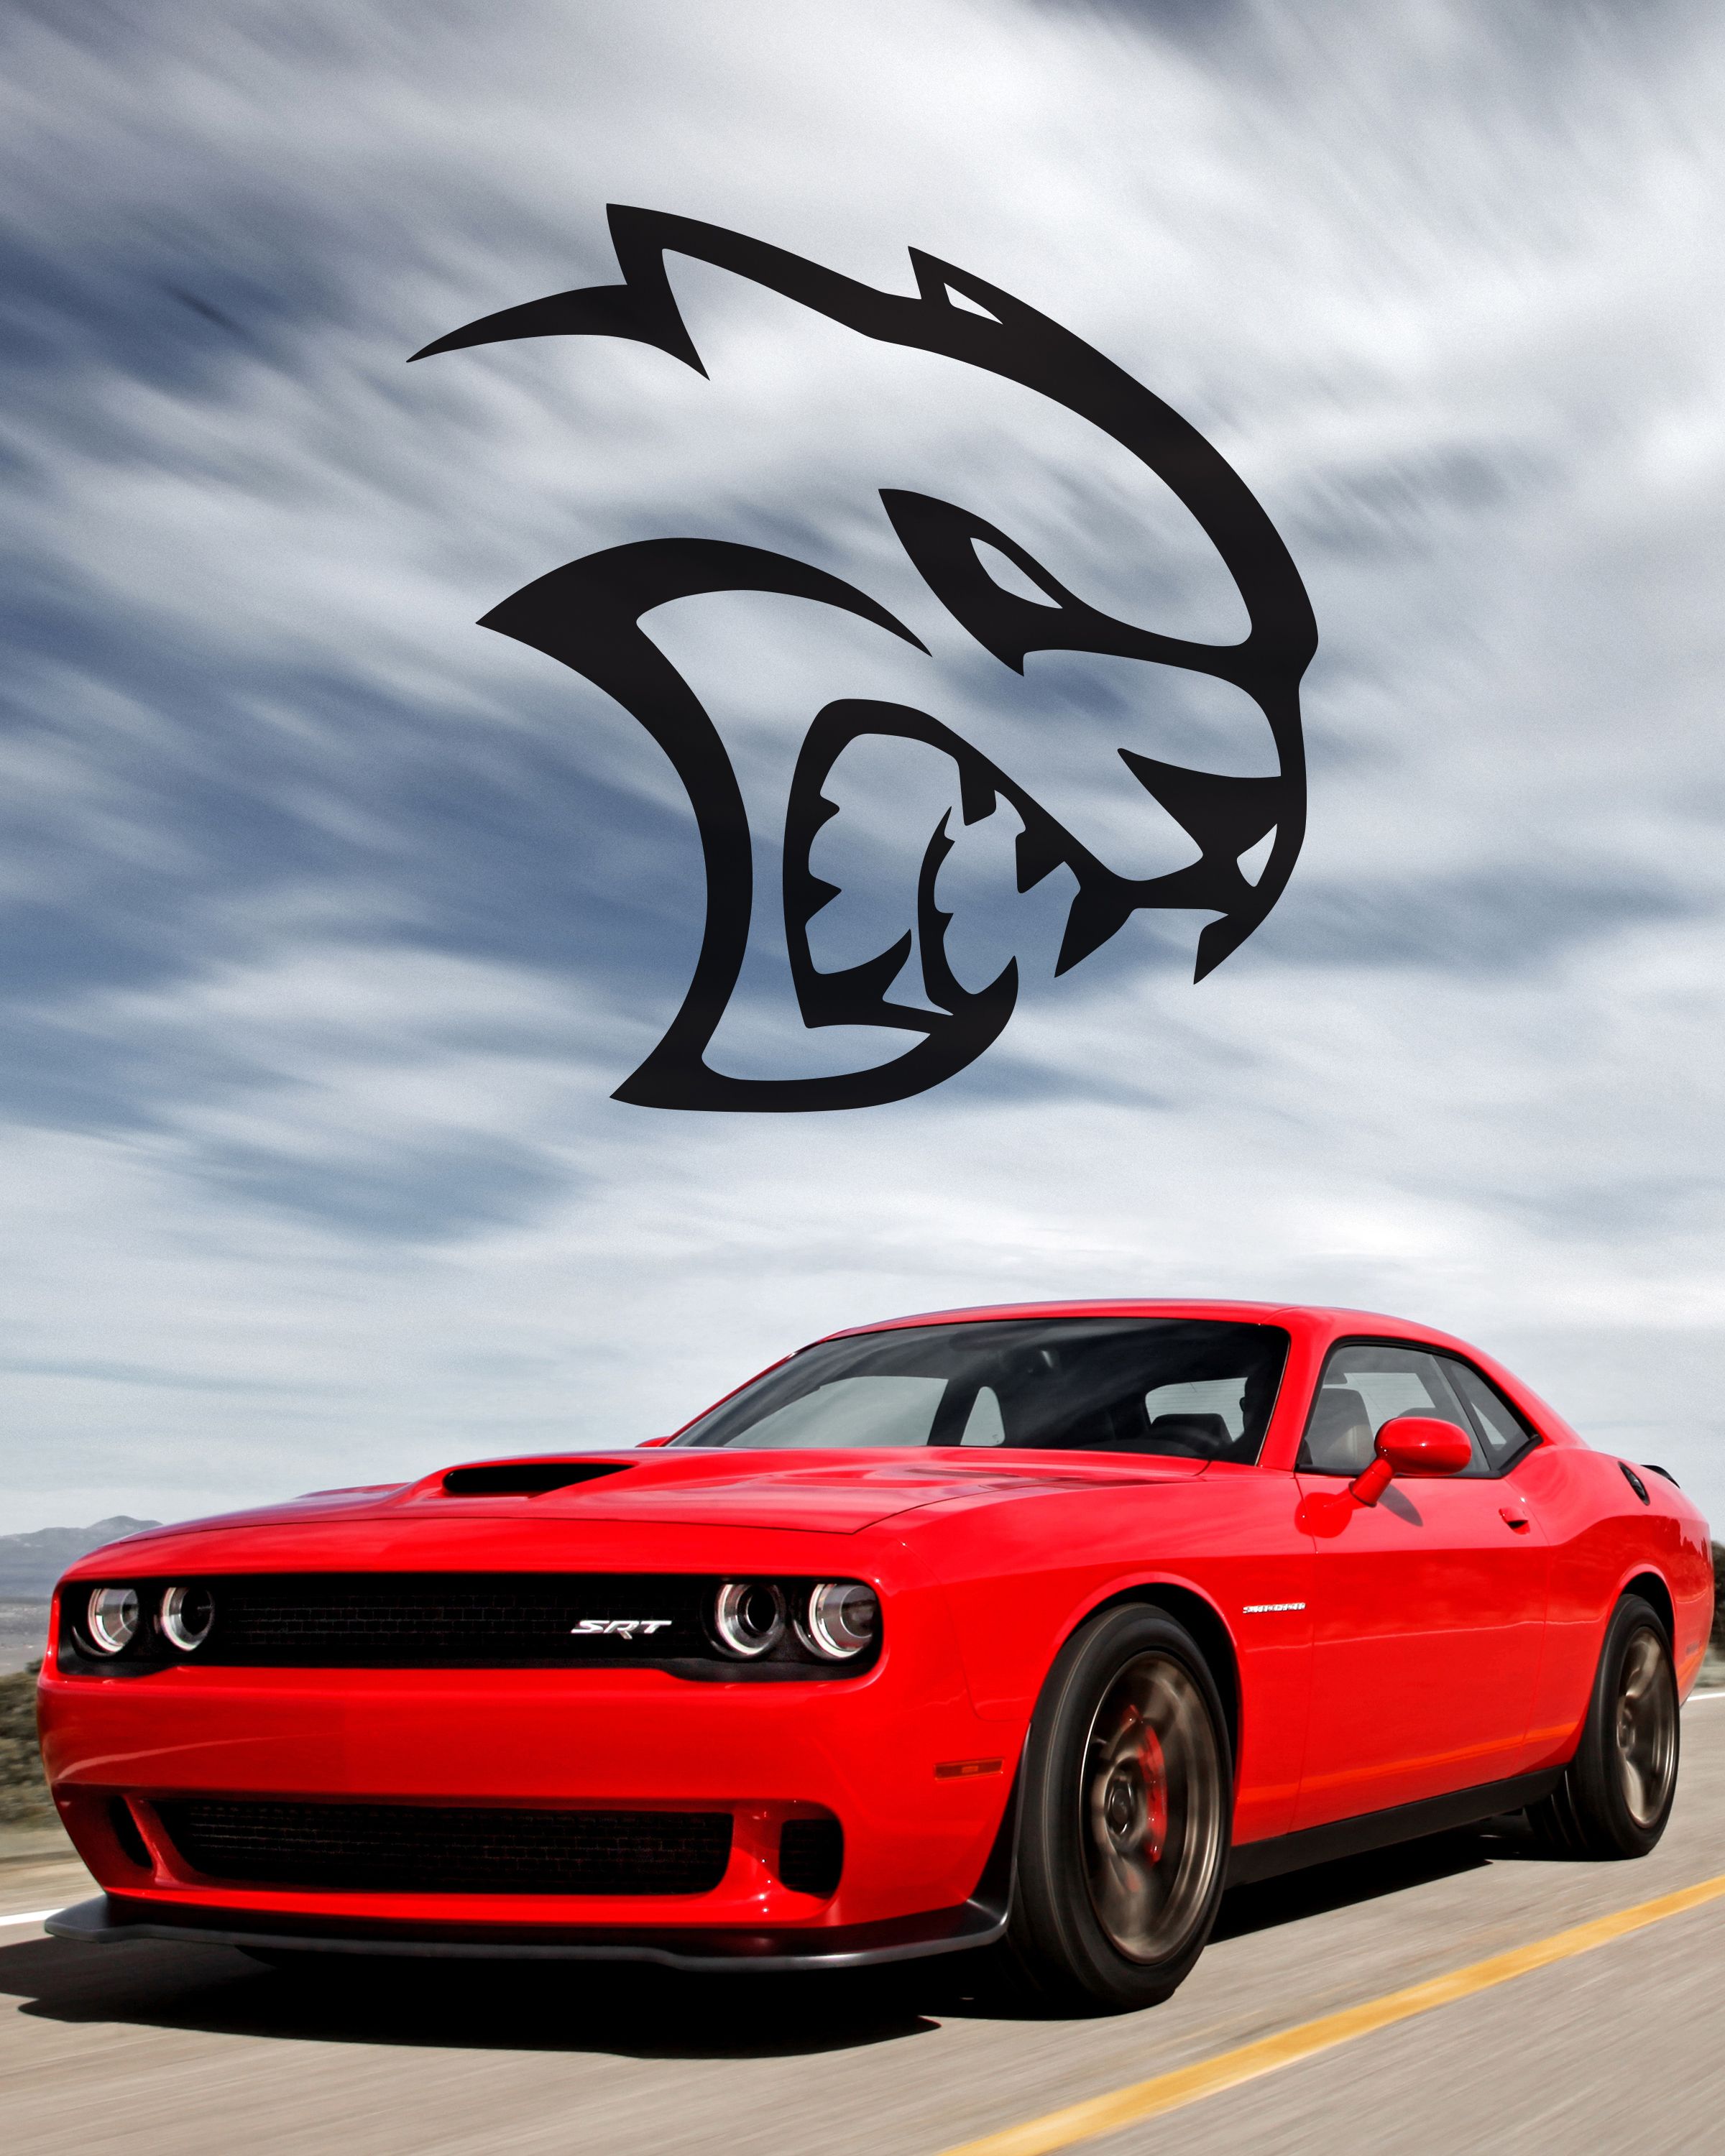 2020 Dodge Charger SRT Hellcat Widebody Wallpapers | SuperCars.net